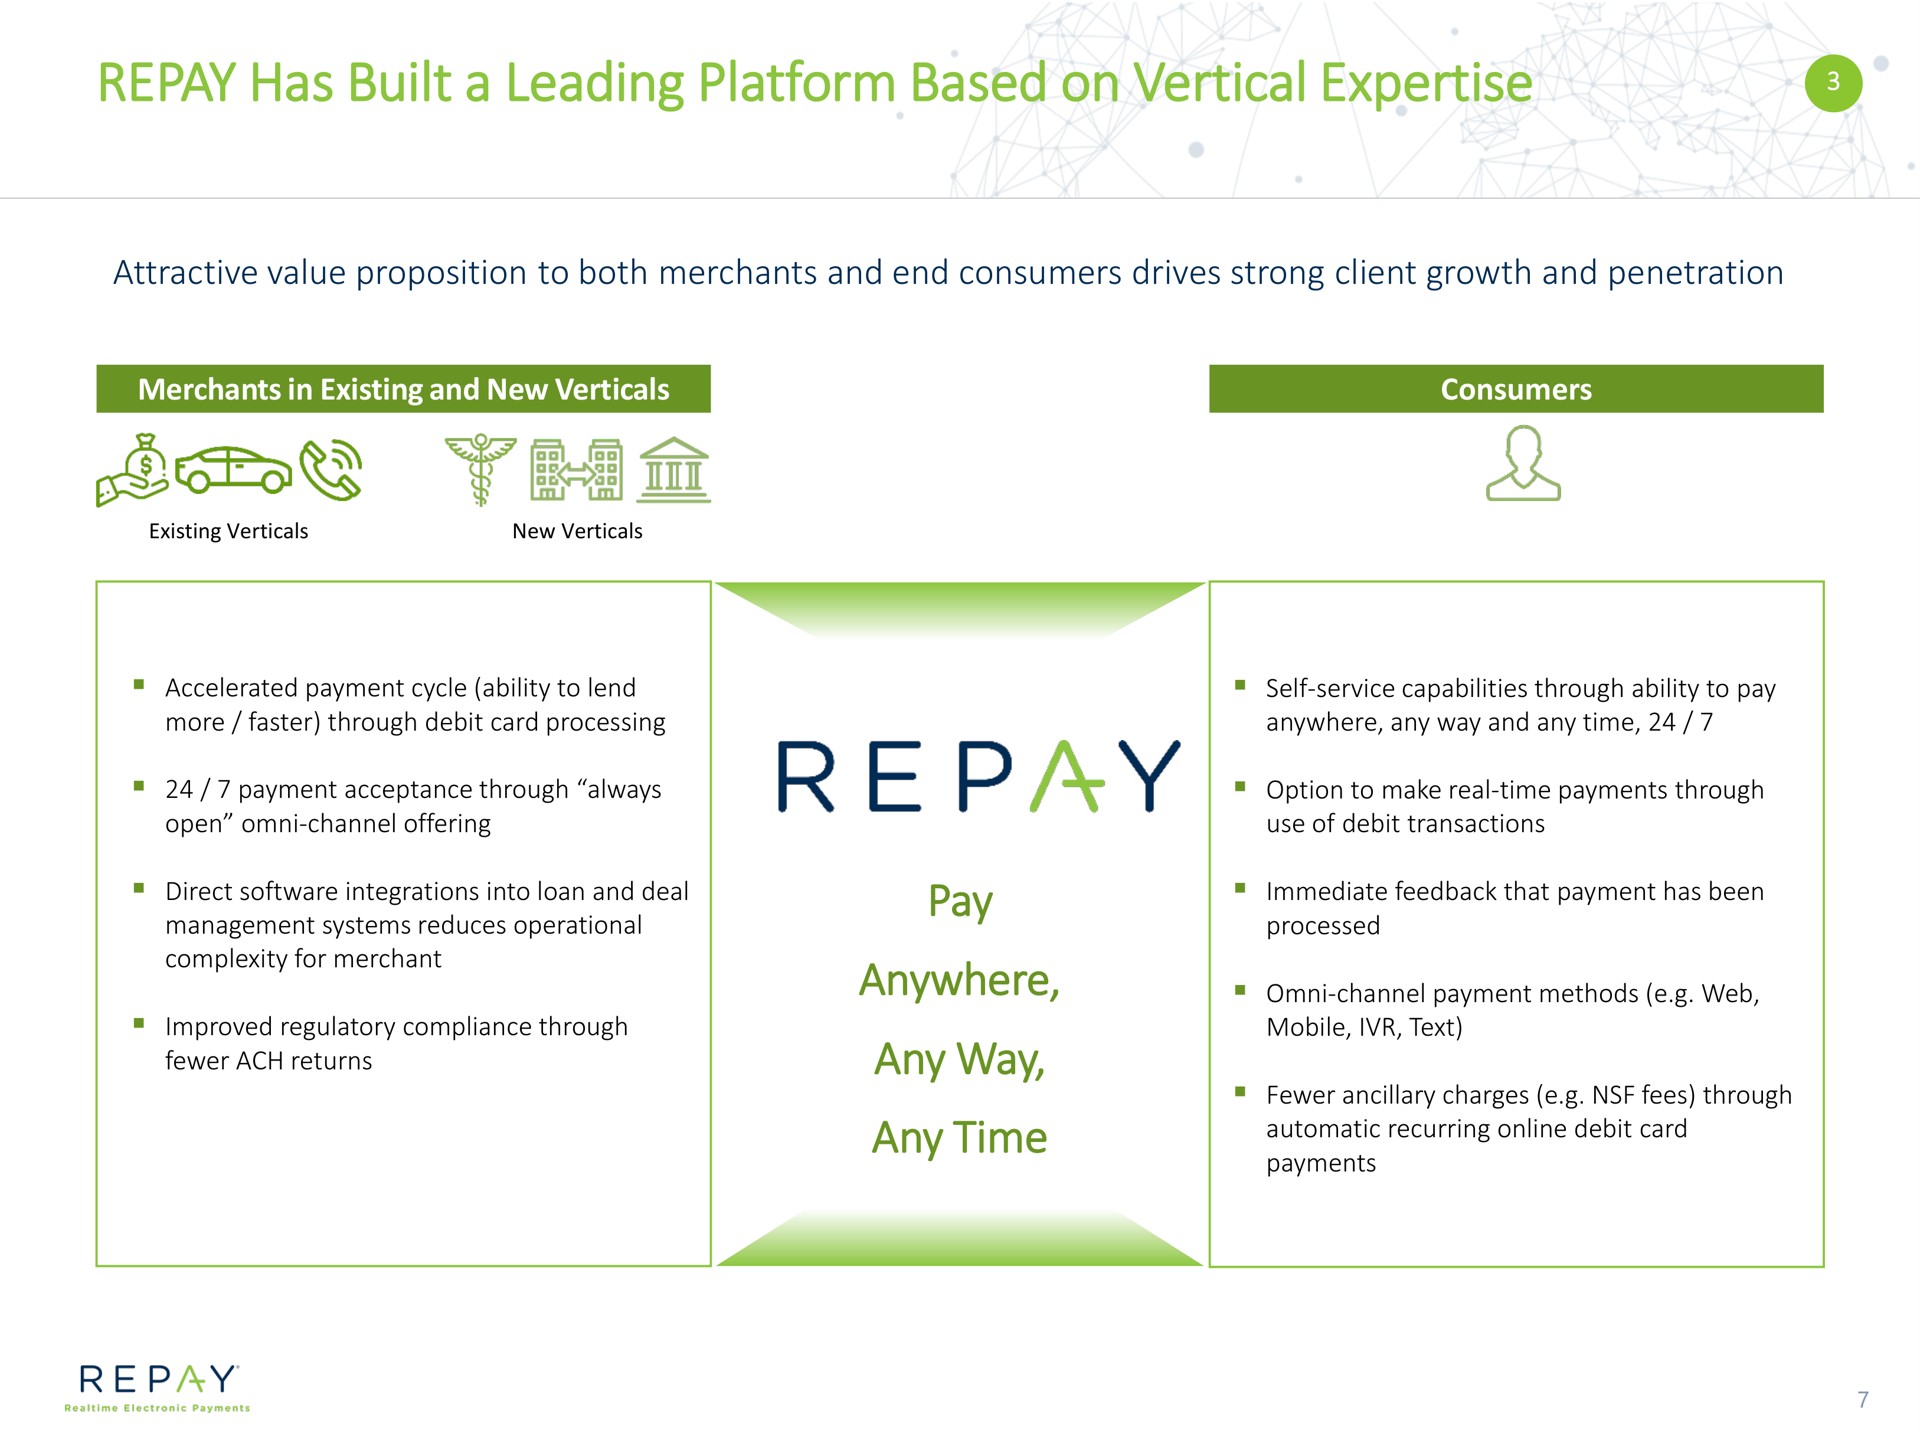 repay has built a leading platform based on vertical pay anywhere any way any time tra | Repay